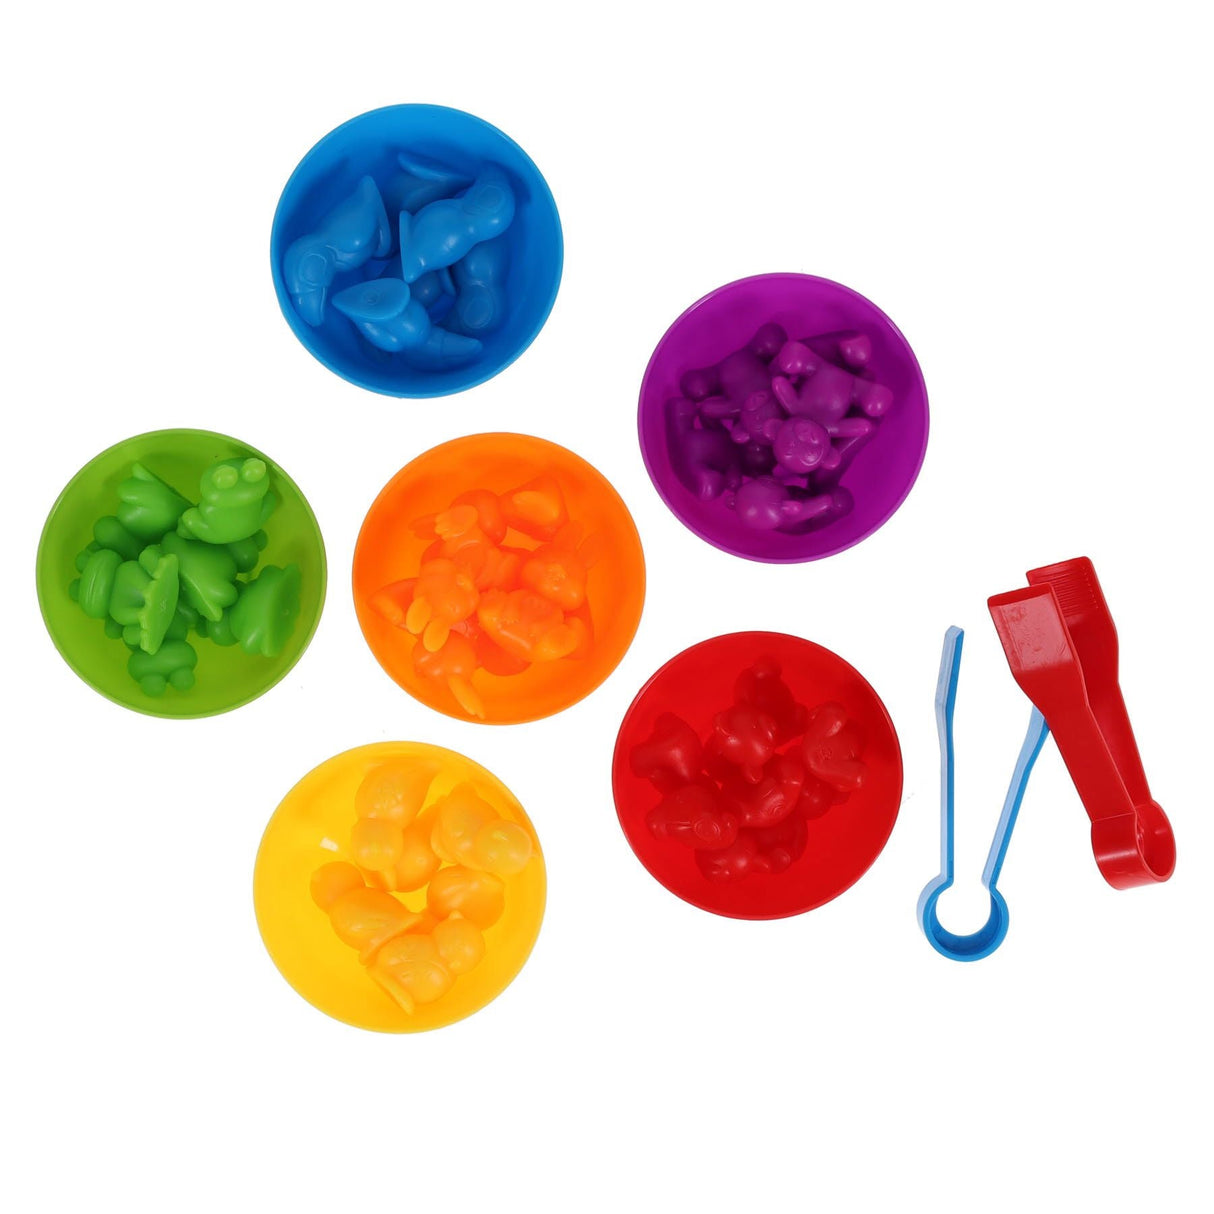 Clever Kidz Sorting Game Rainbow Animals - 44 Pieces | Stationery Shop UK